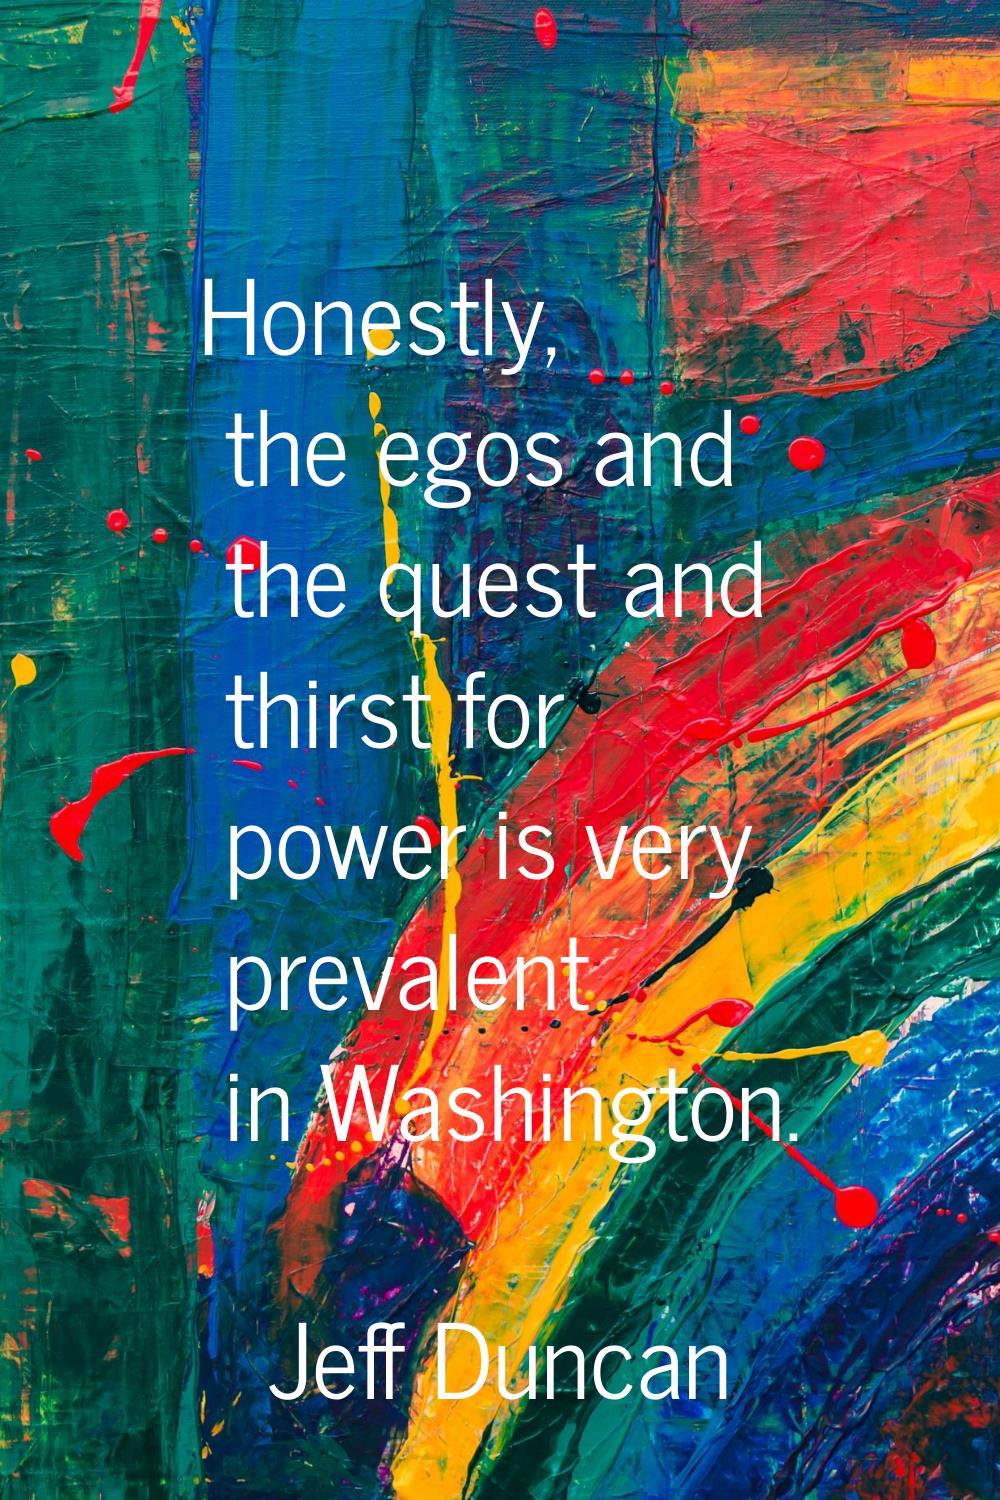 Honestly, the egos and the quest and thirst for power is very prevalent in Washington.